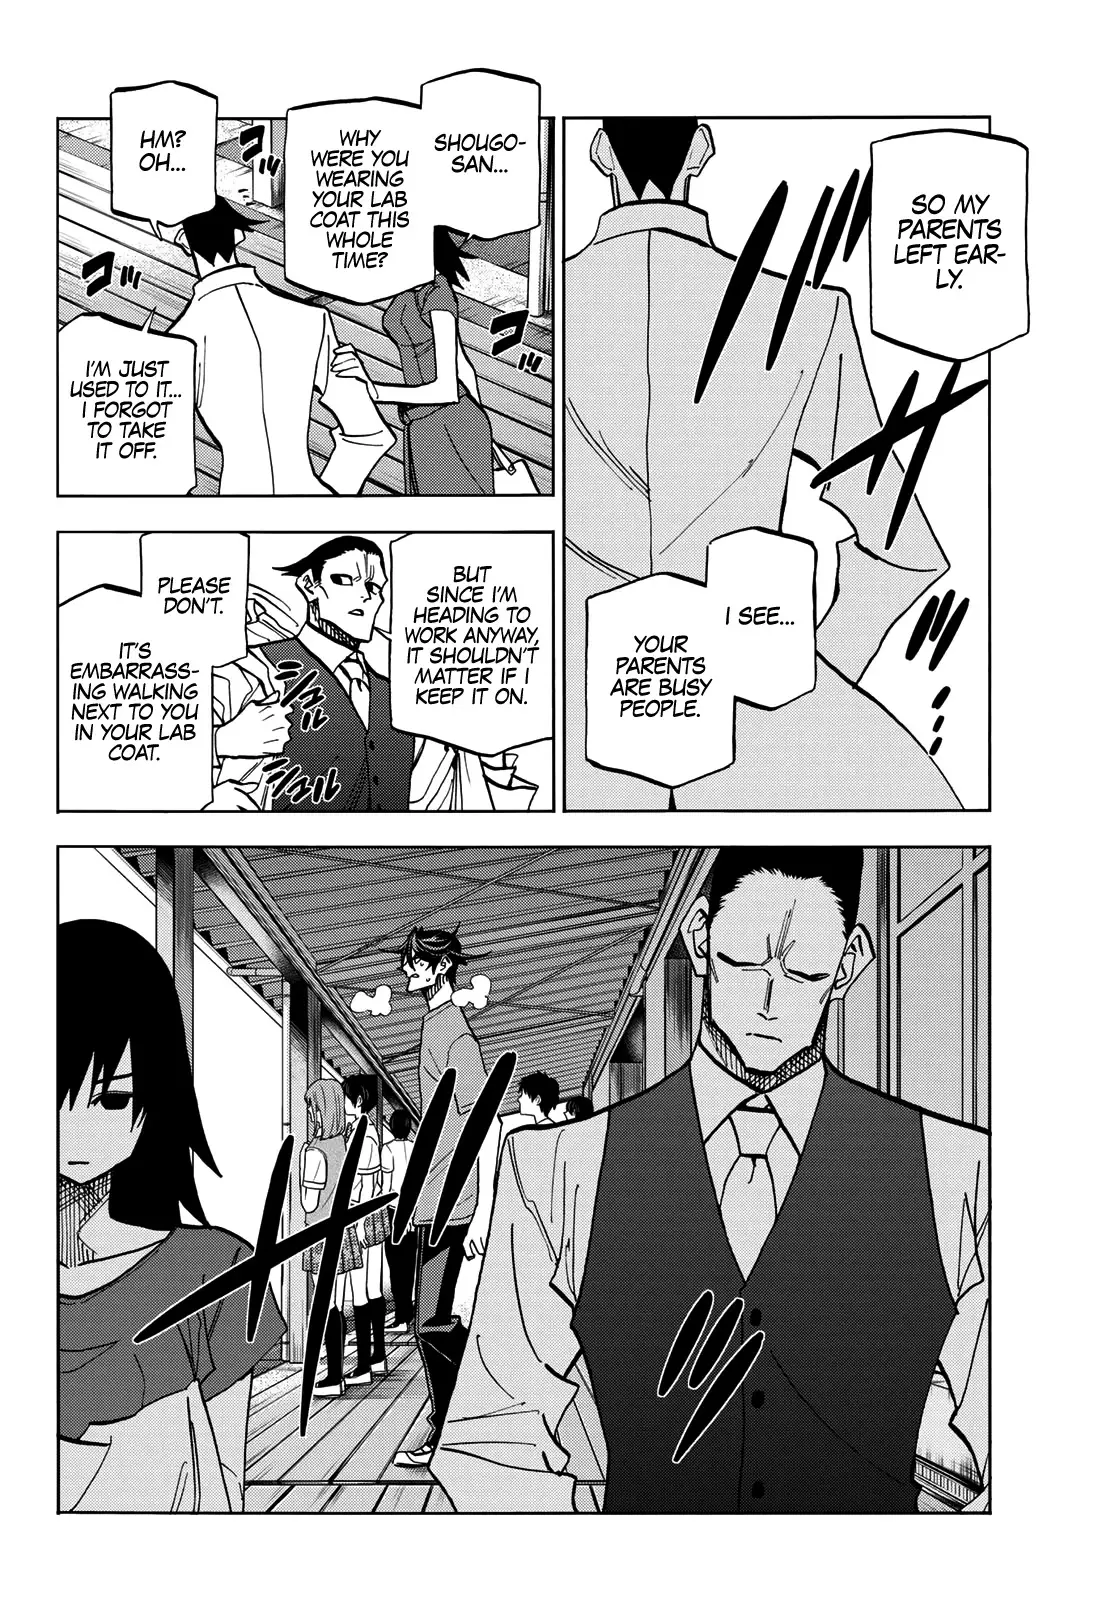 The Story Between A Dumb Prefect And A High School Girl With An Inappropriate Skirt Length - 34 page 27